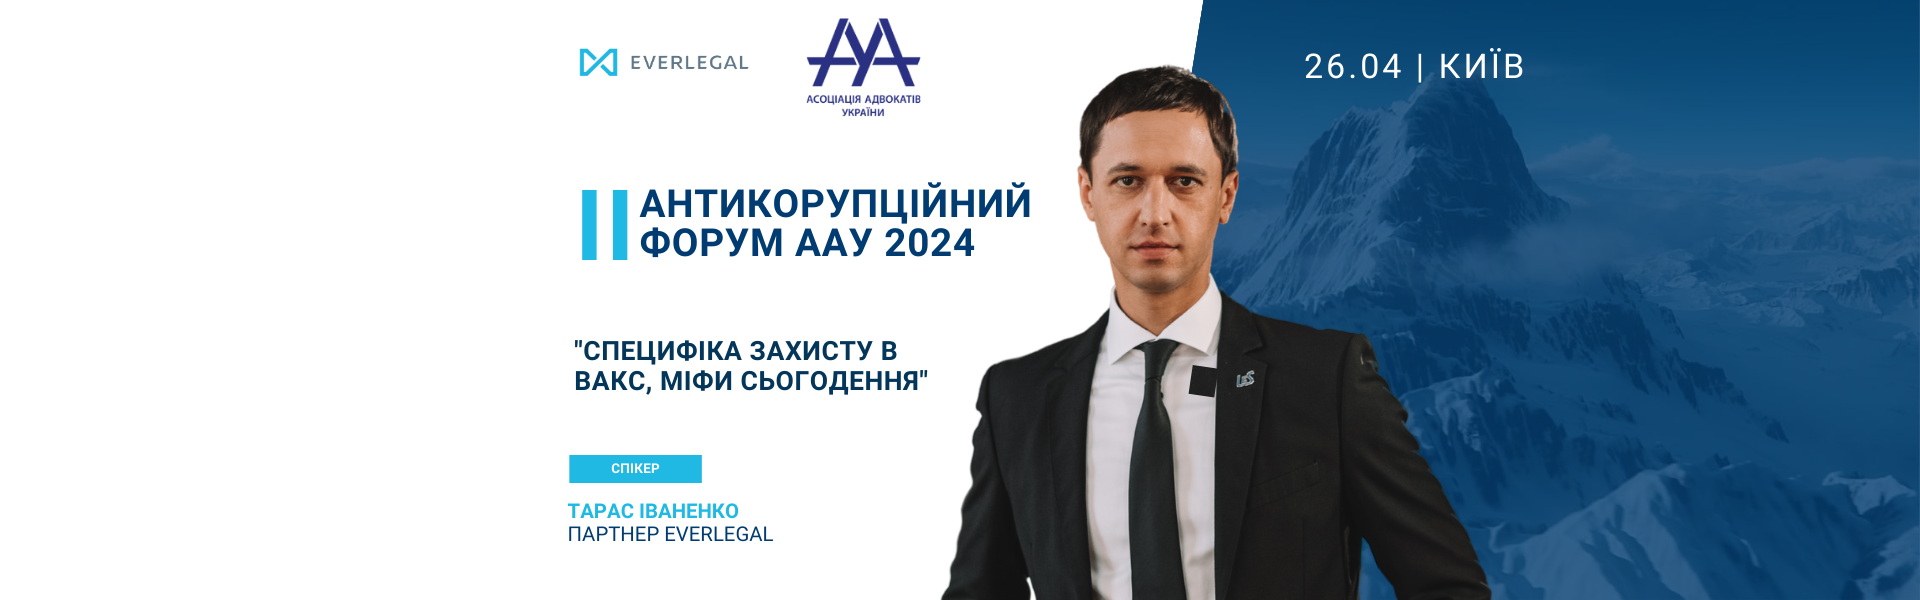 We invite you to the II Anti-Corruption Forum of the UAA 2024